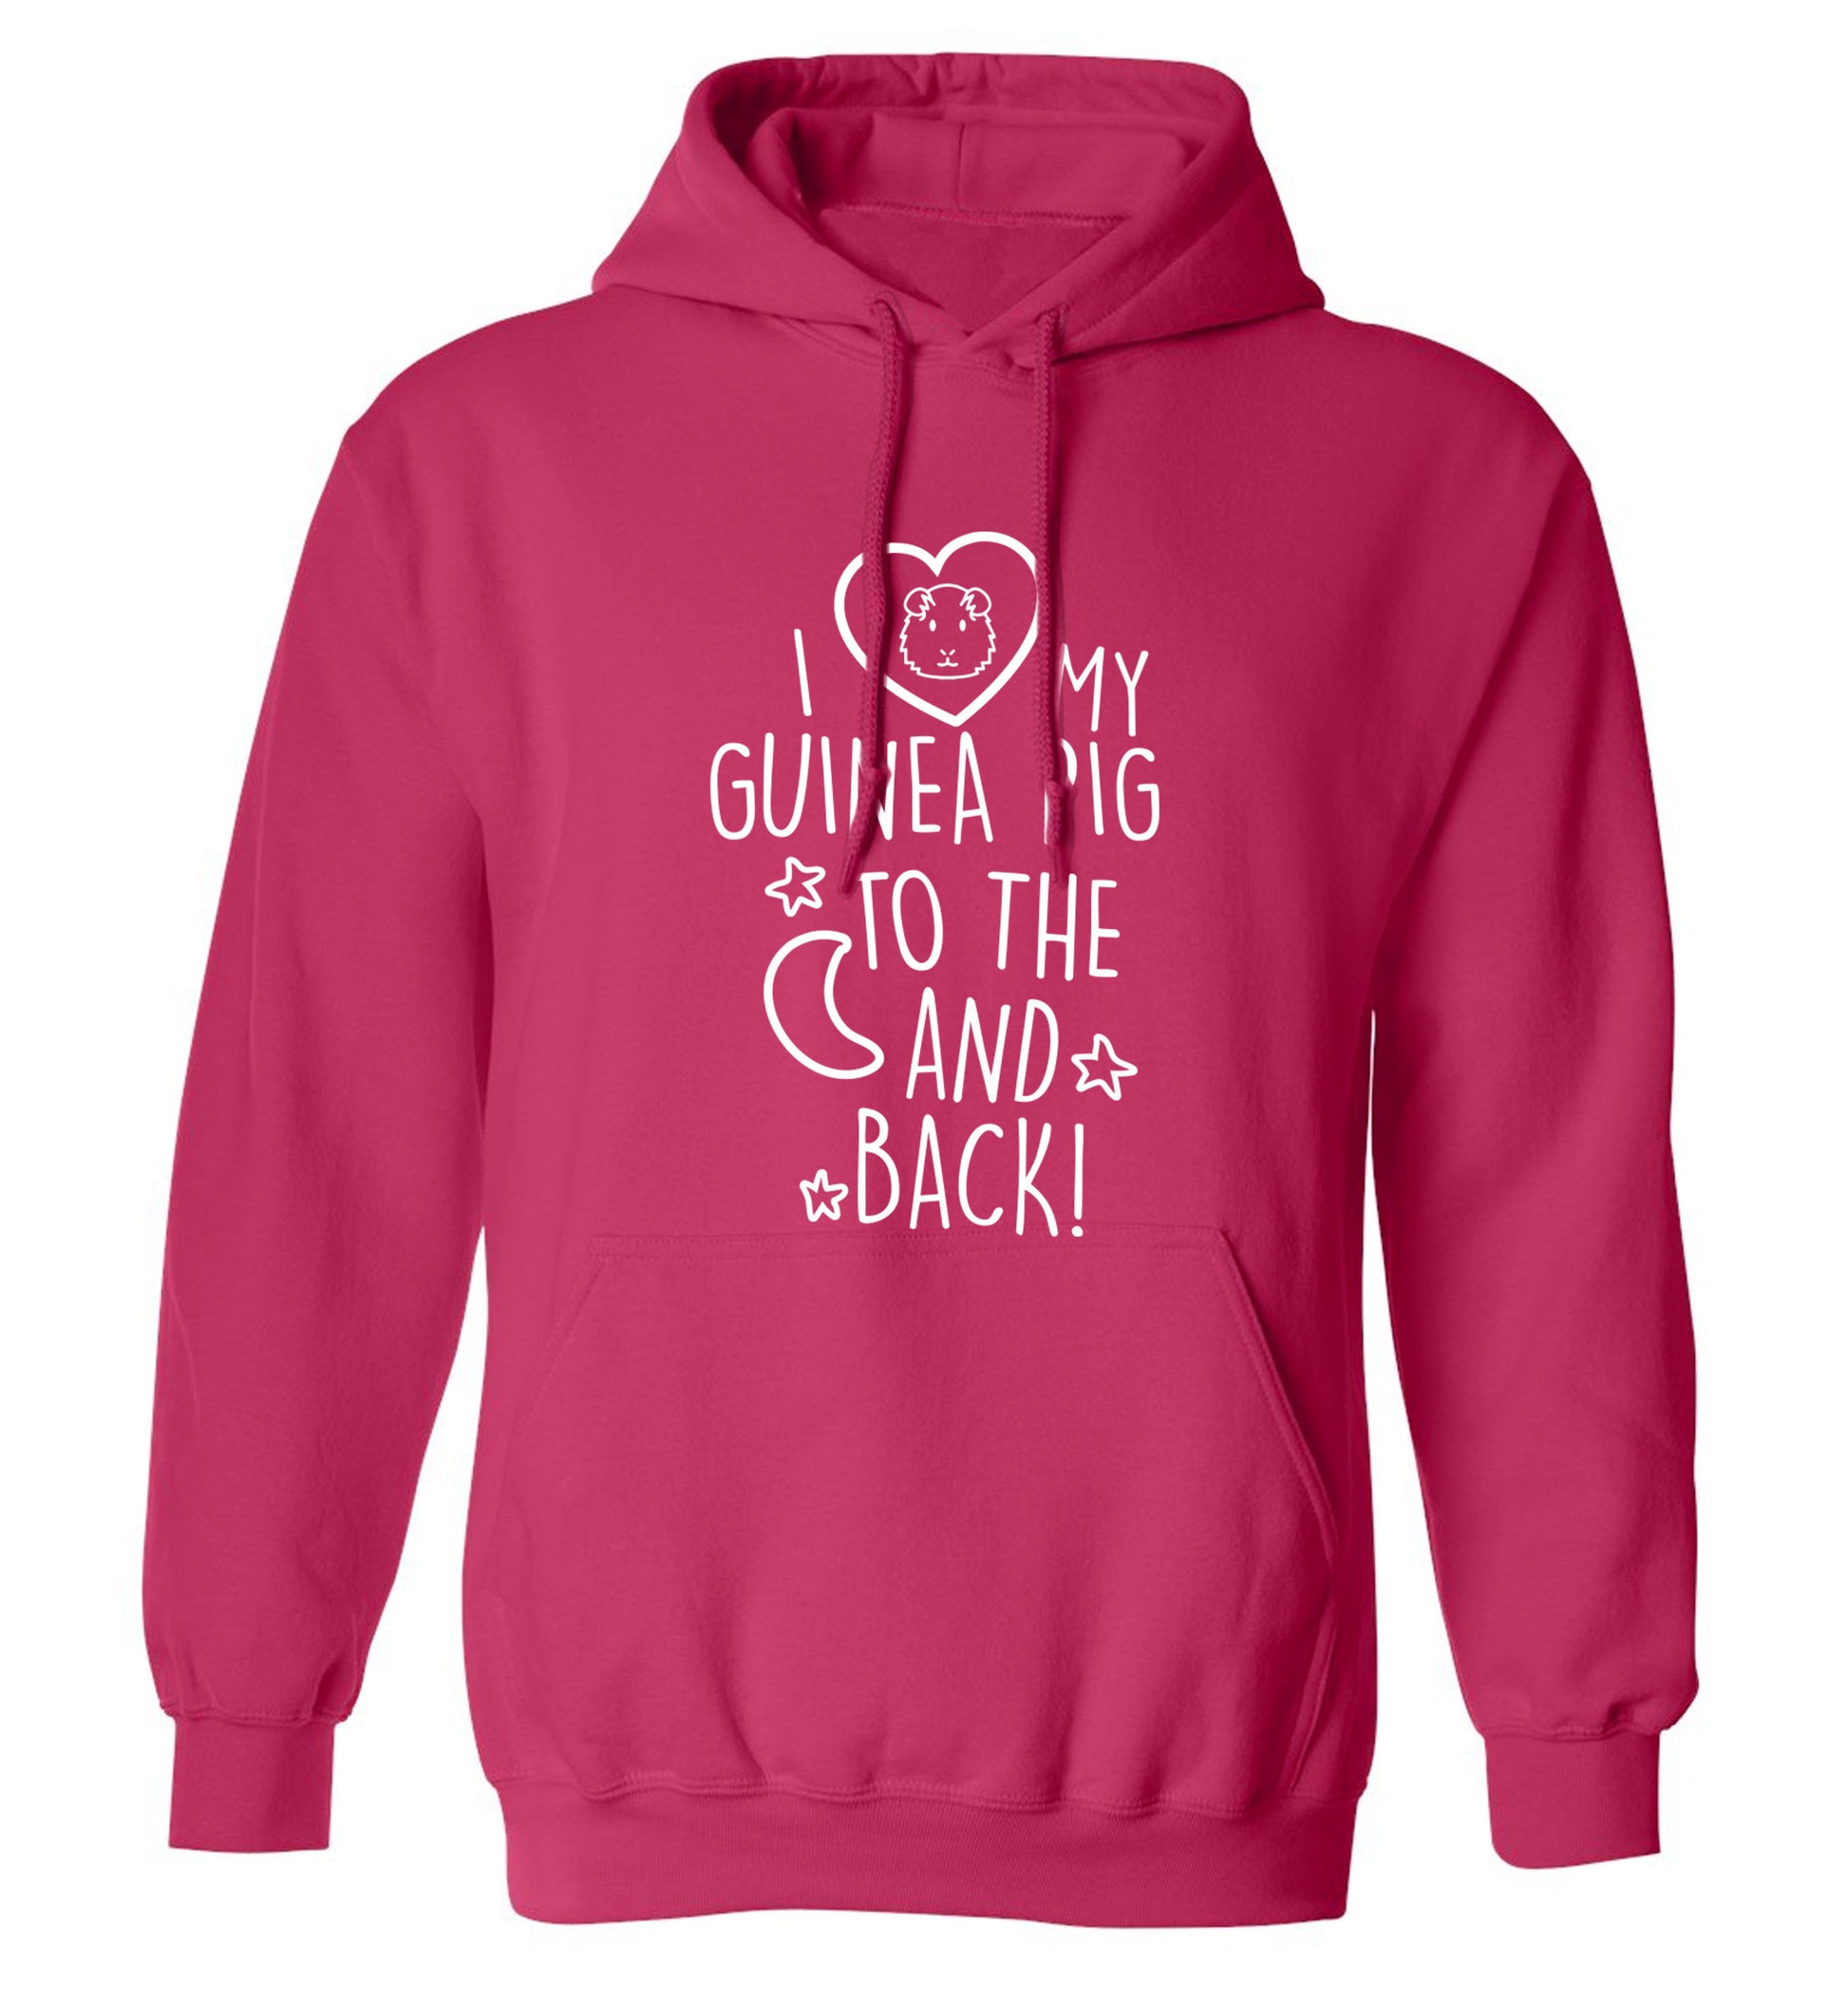 I love my guinea pig to the moon and back adults unisex pink hoodie 2XL